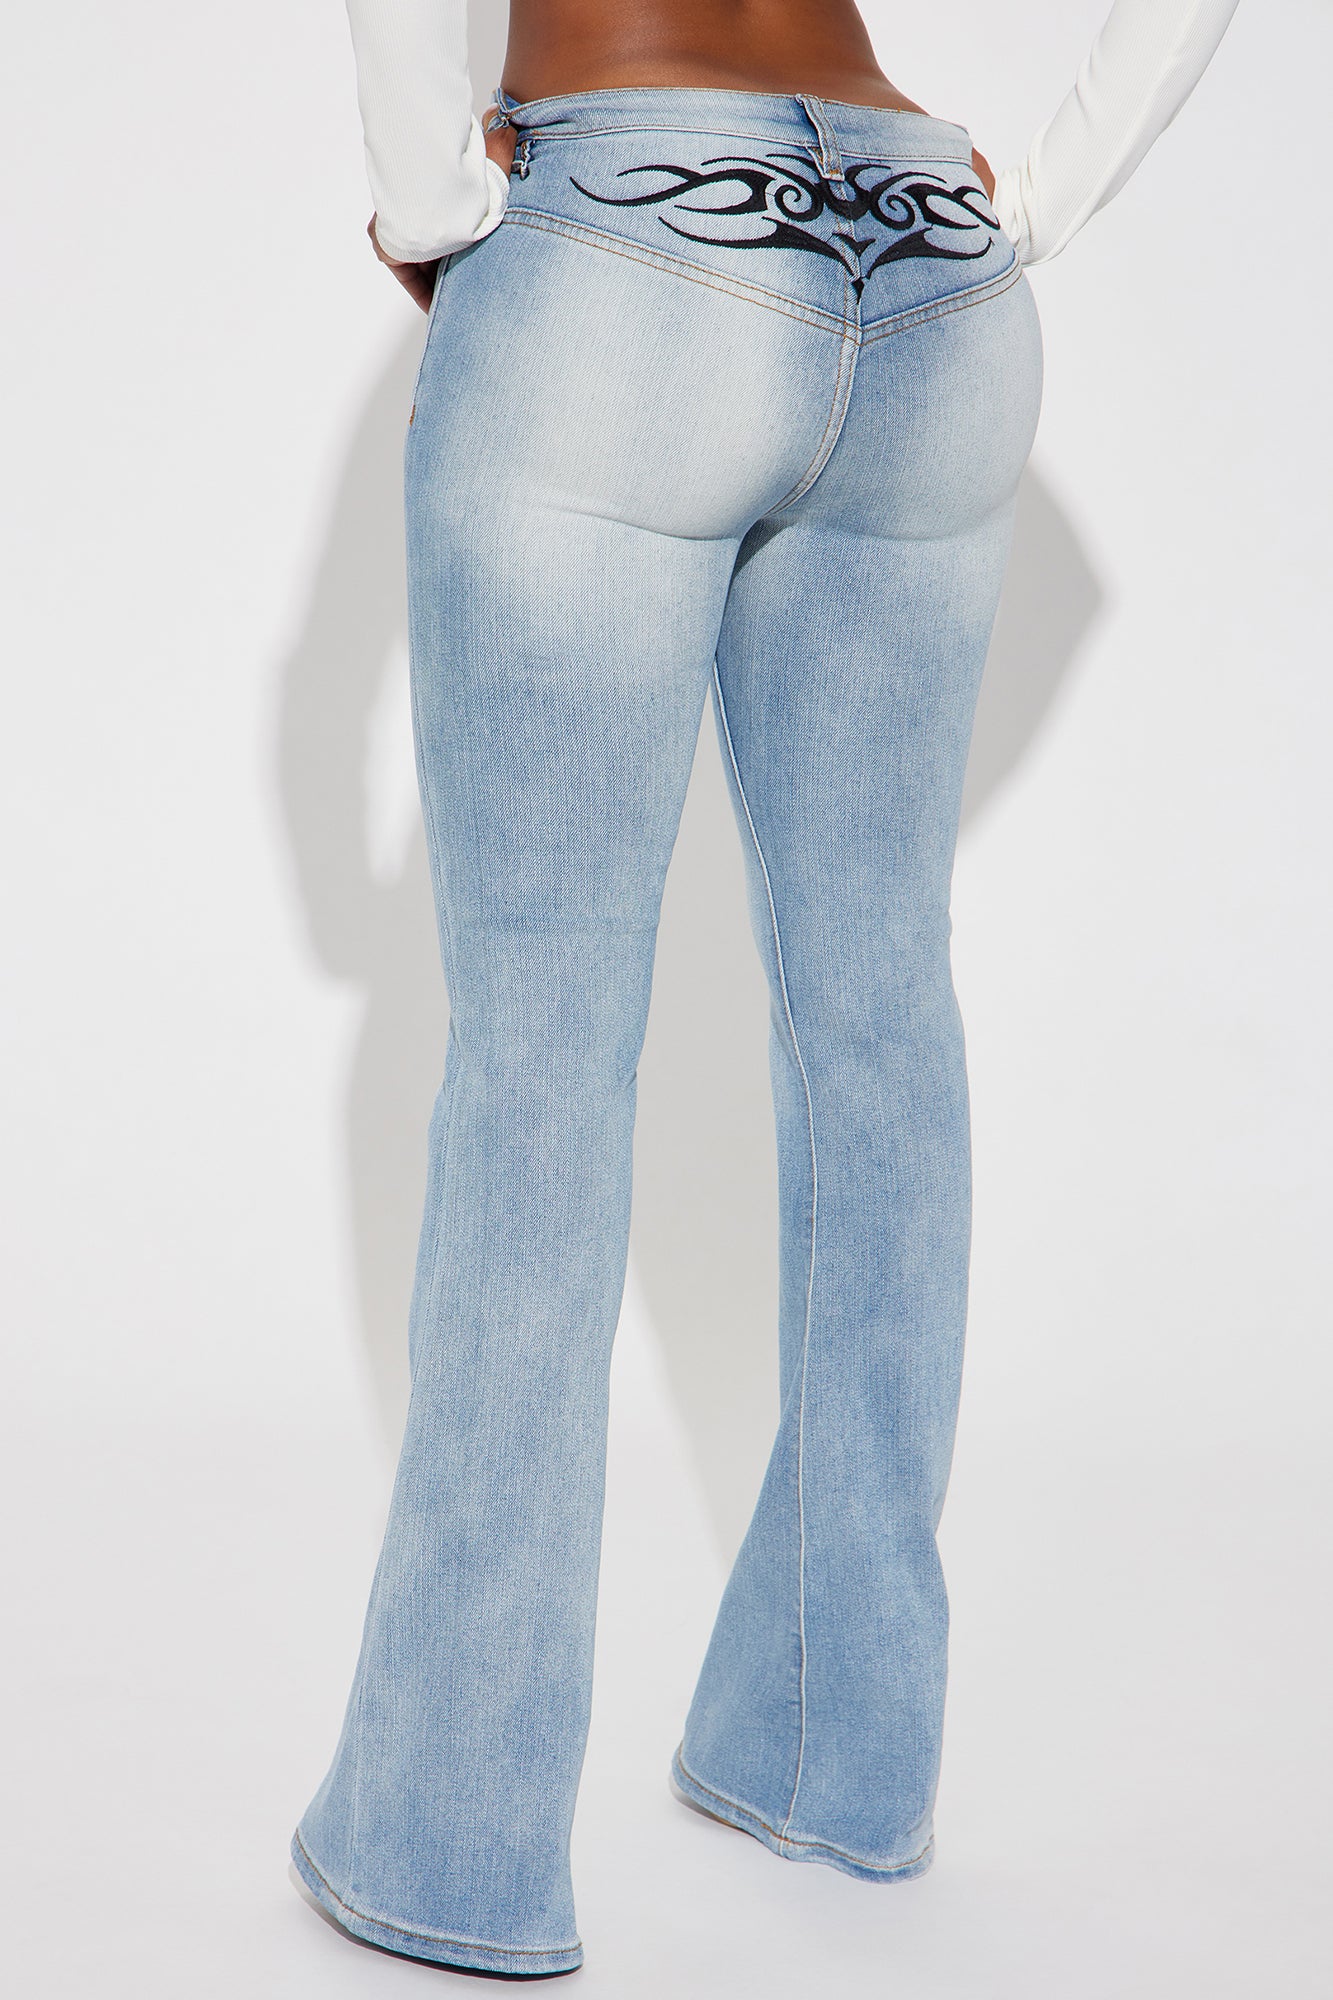 Vintage Y2K Womens Low Rise Flare High Waisted Bootcut Jeans In Light Blue  With Bell Bottoms Basic, Plain, And Retro Denim Style From Unityjoey,  $24.49